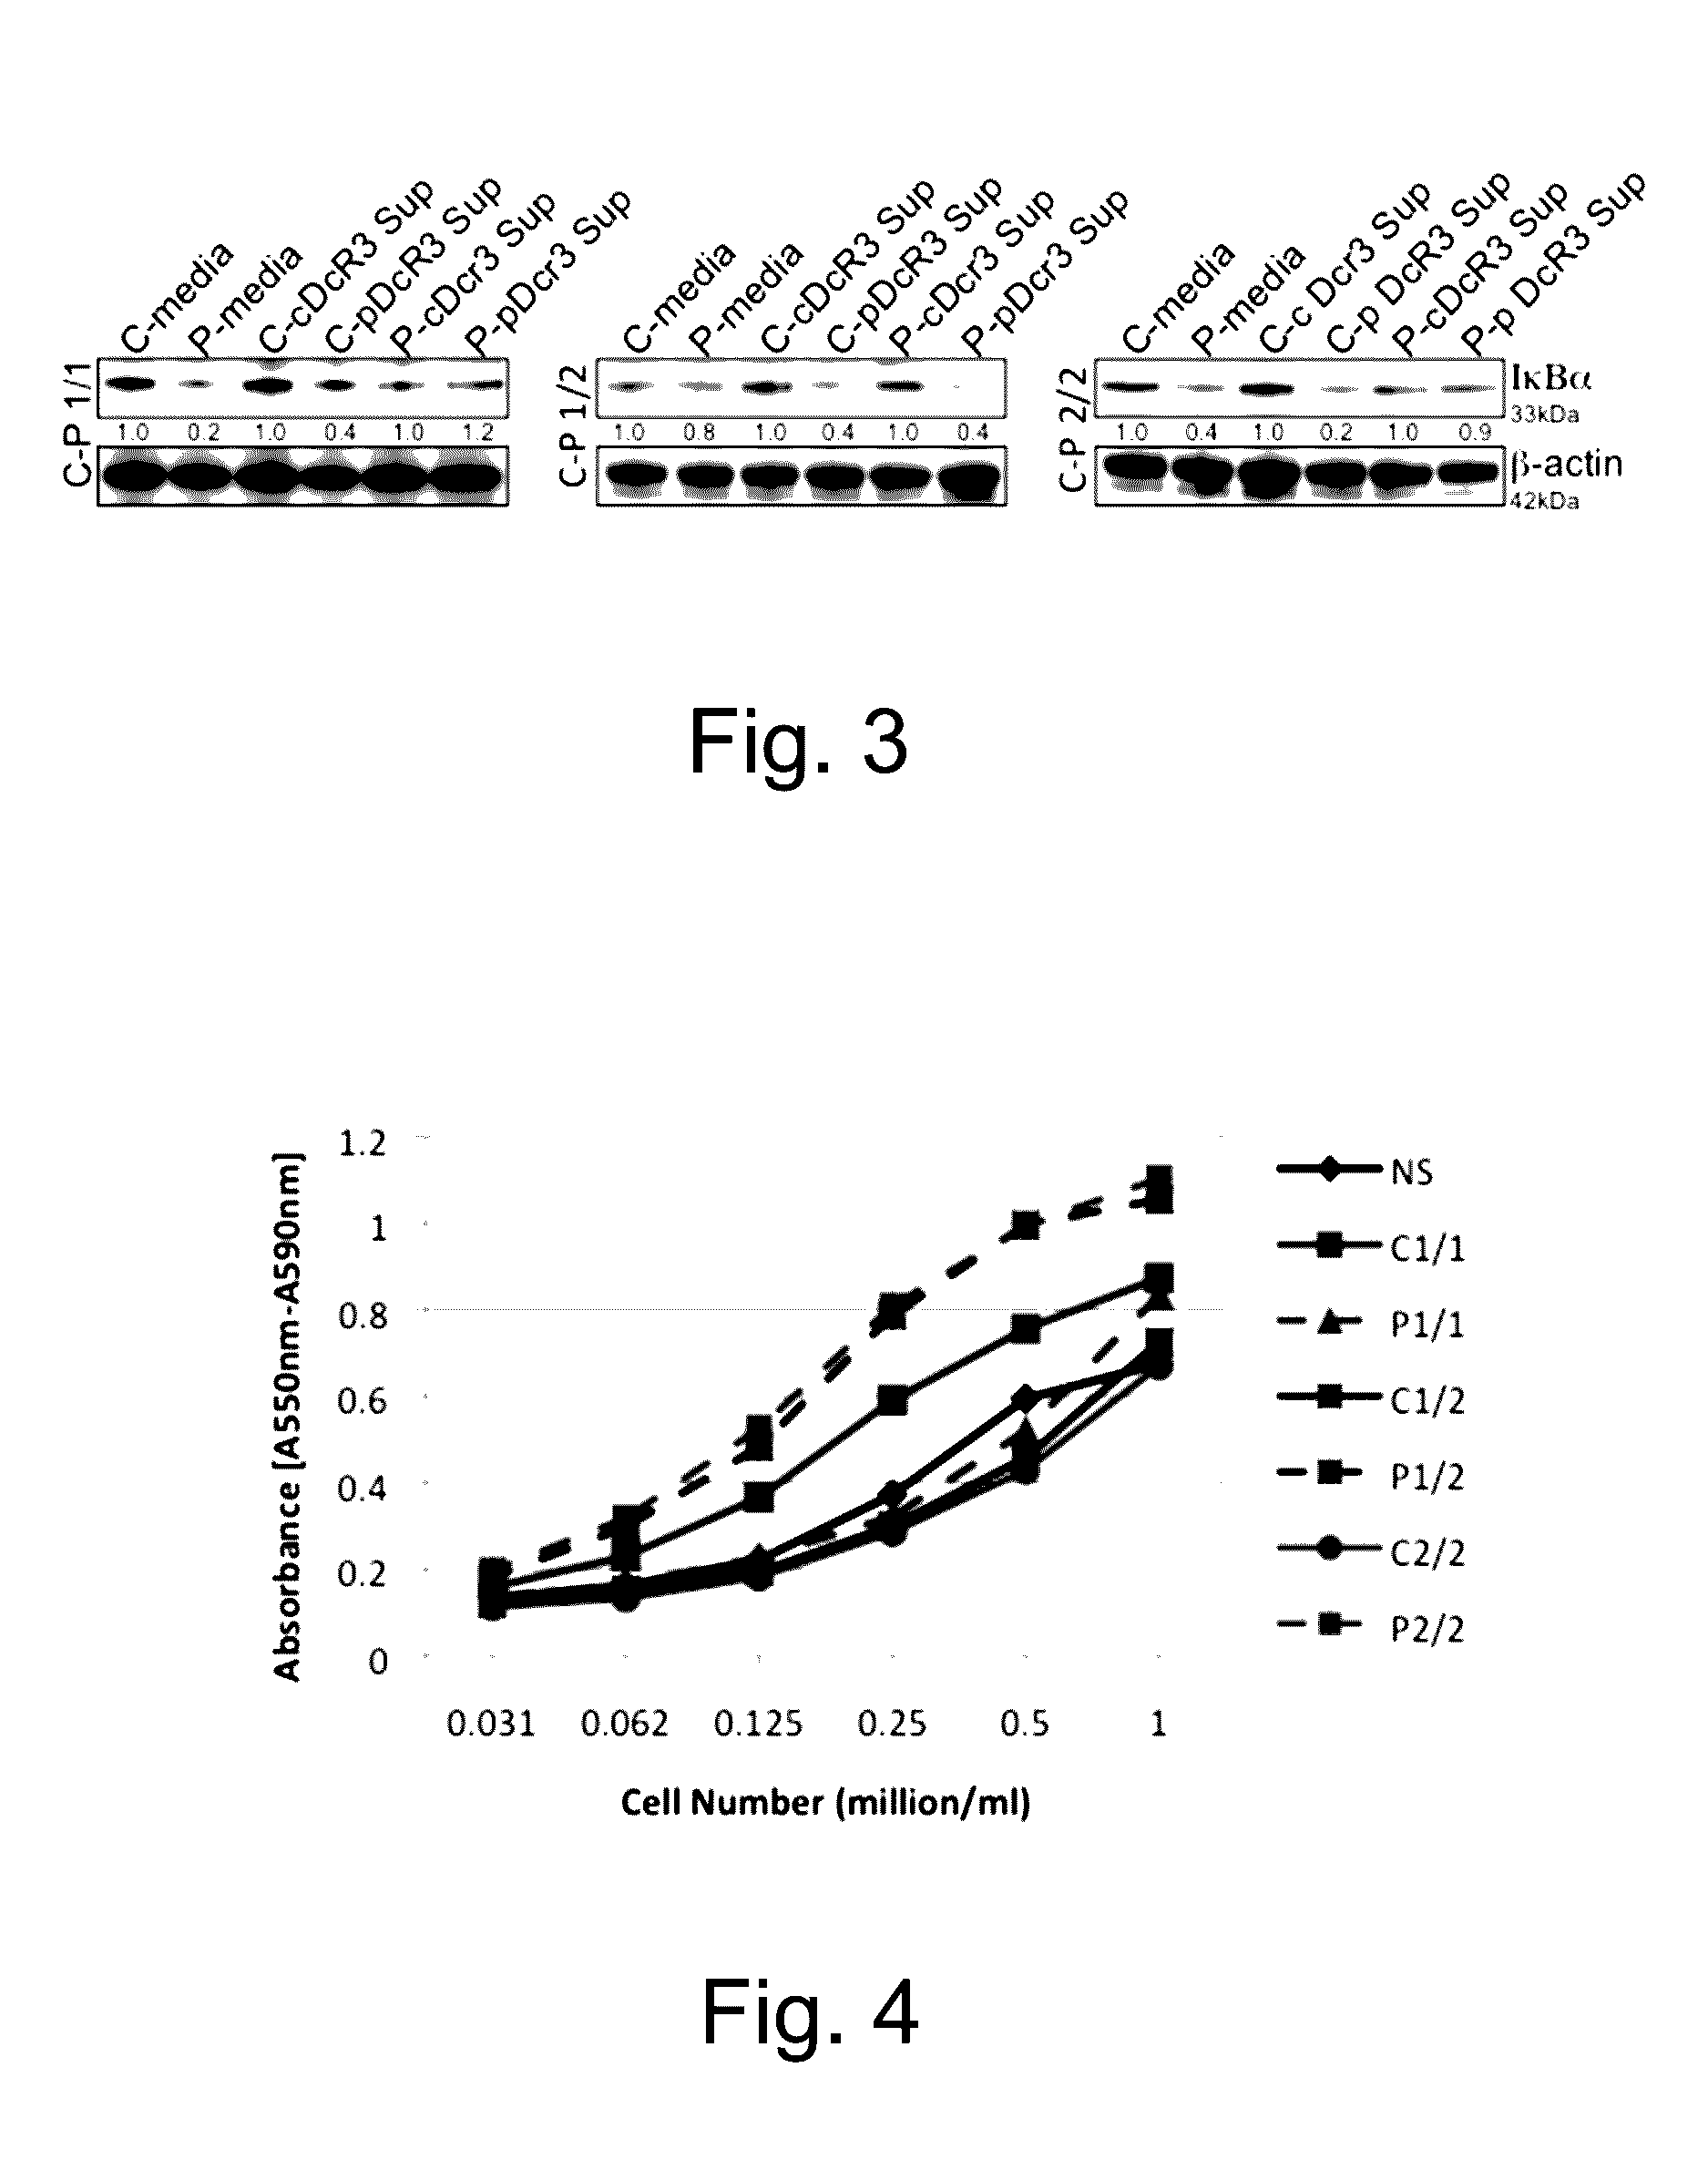 Methods of Treating Autoimmune Conditions in Patients with Genetic Variations in DCR3 or in a DCR3 Network Gene